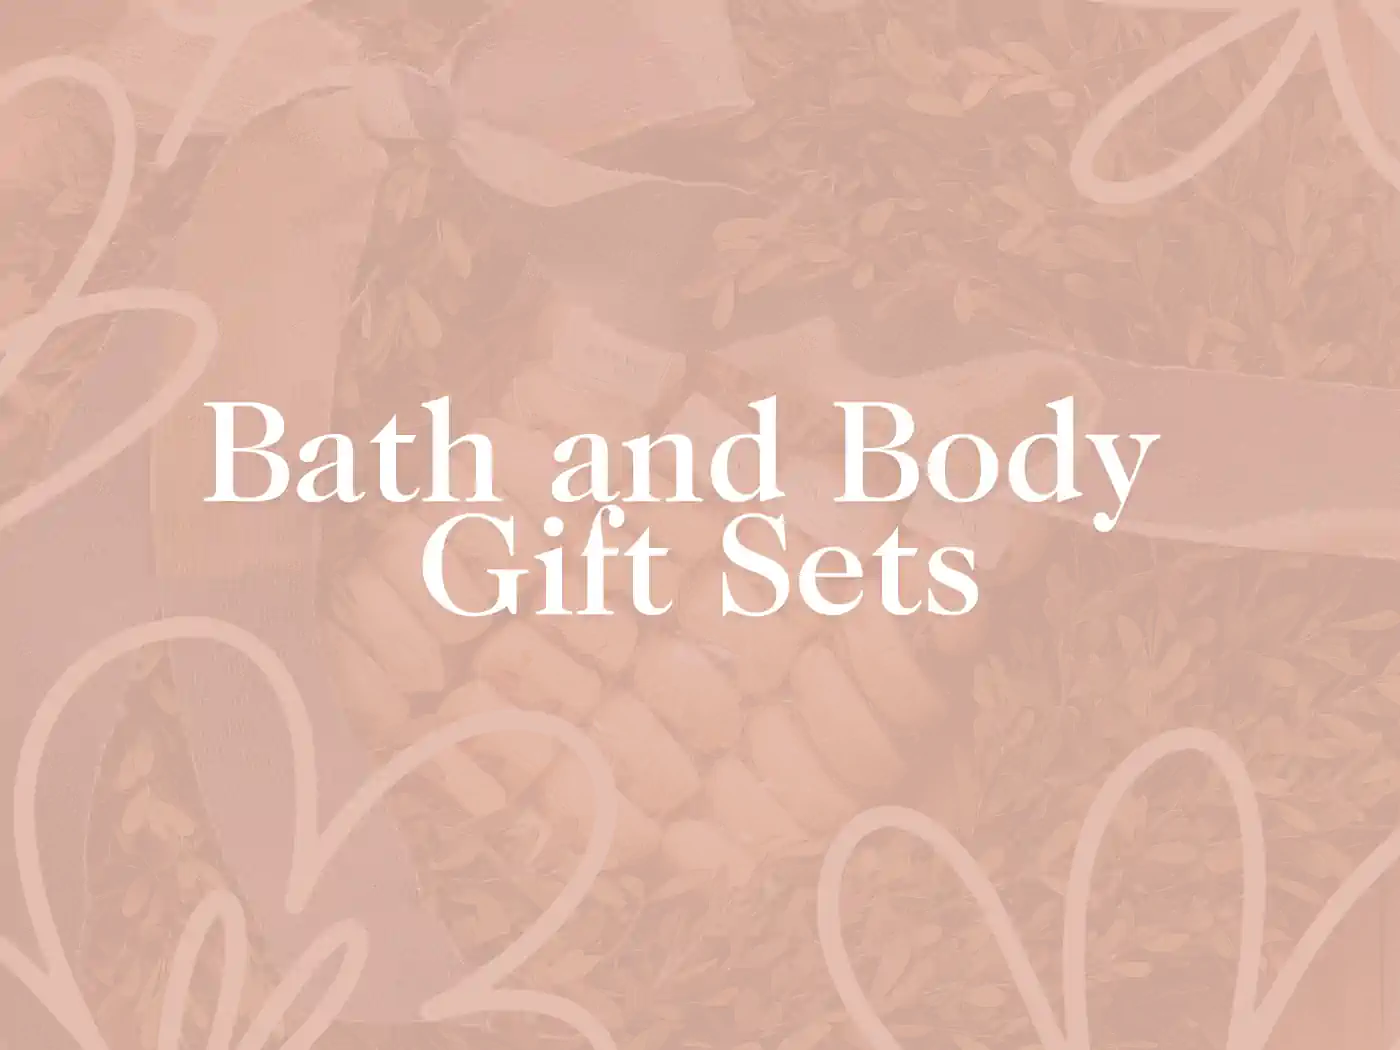 Elegant text overlay stating 'Bath and Body Gift Sets' on a warm-toned background with subtle floral designs, part of the exquisite range at Fabulous Flowers and Gifts